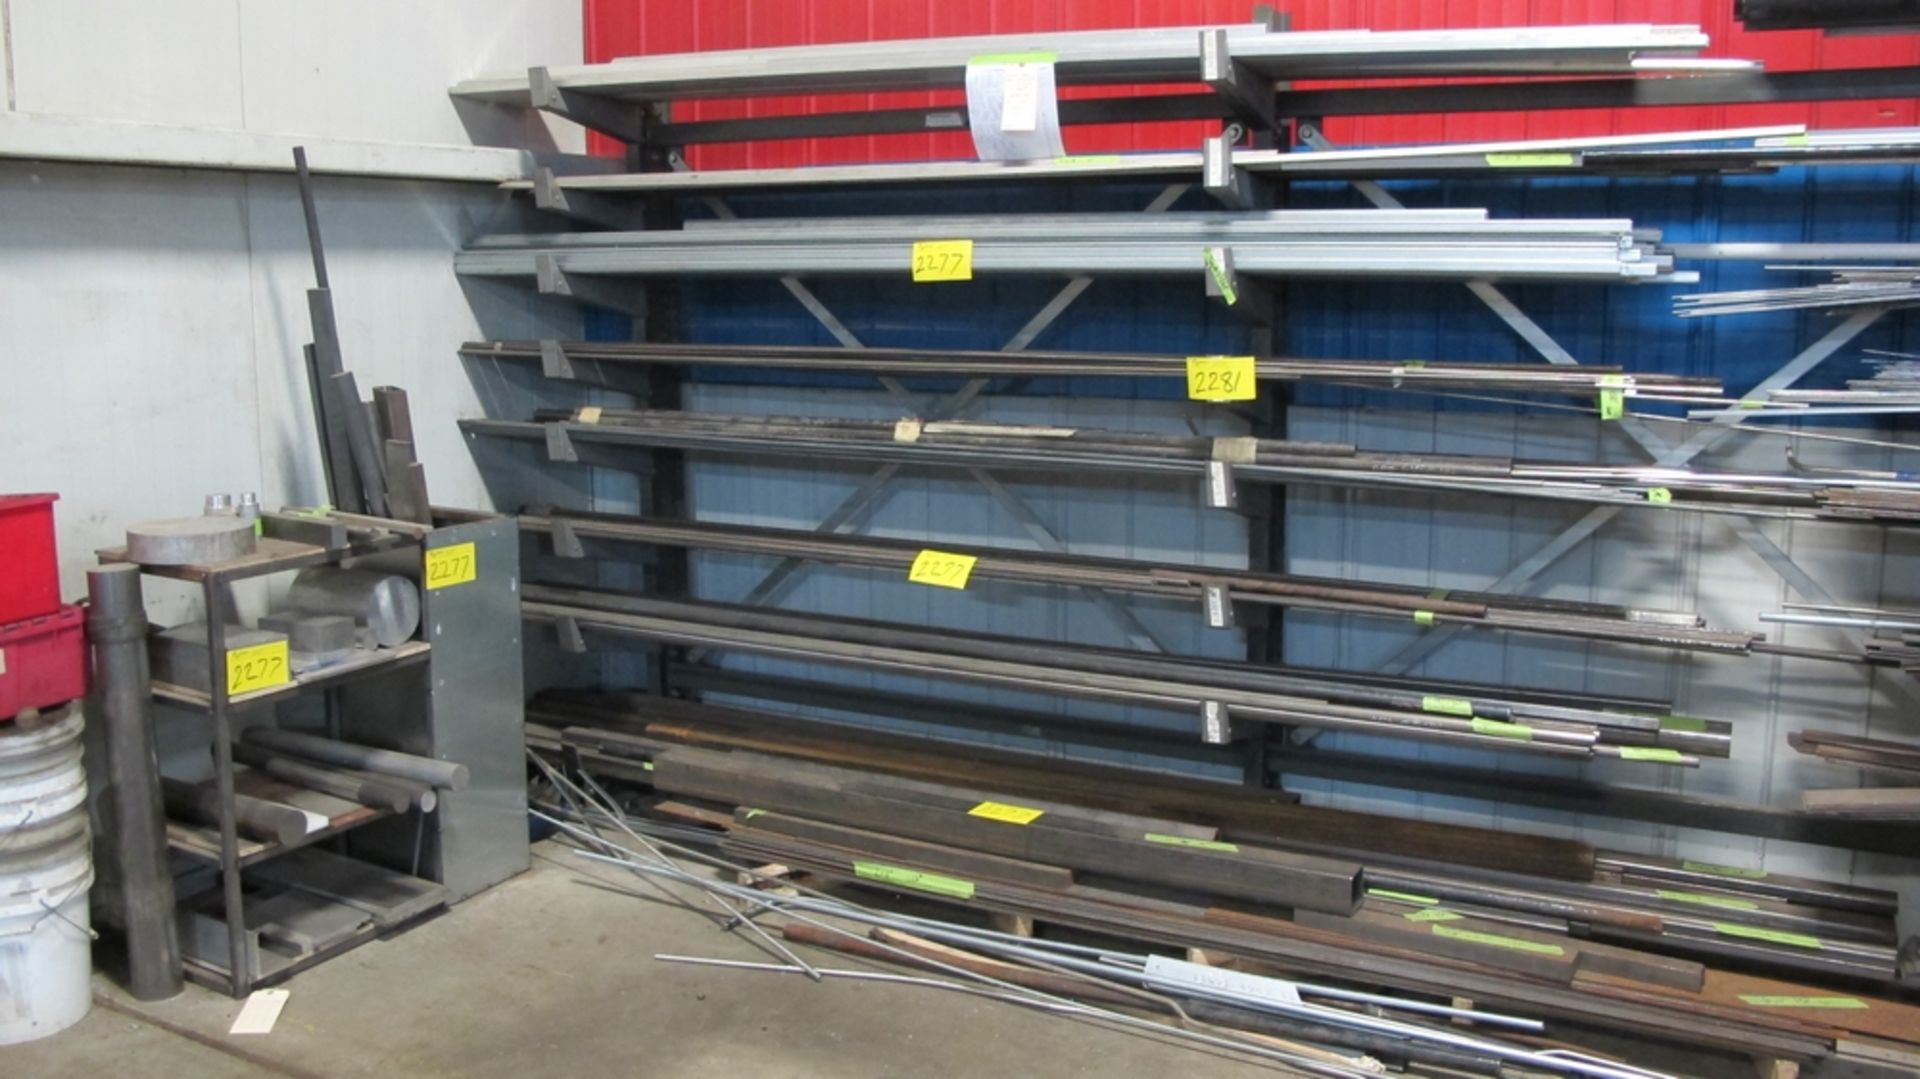 LOT OF RACK W/METAL STOCK AND CUTOFFS, CONTENTS OF 1 SECTION OF RACKING (8 LEVELS), BAR TUBE